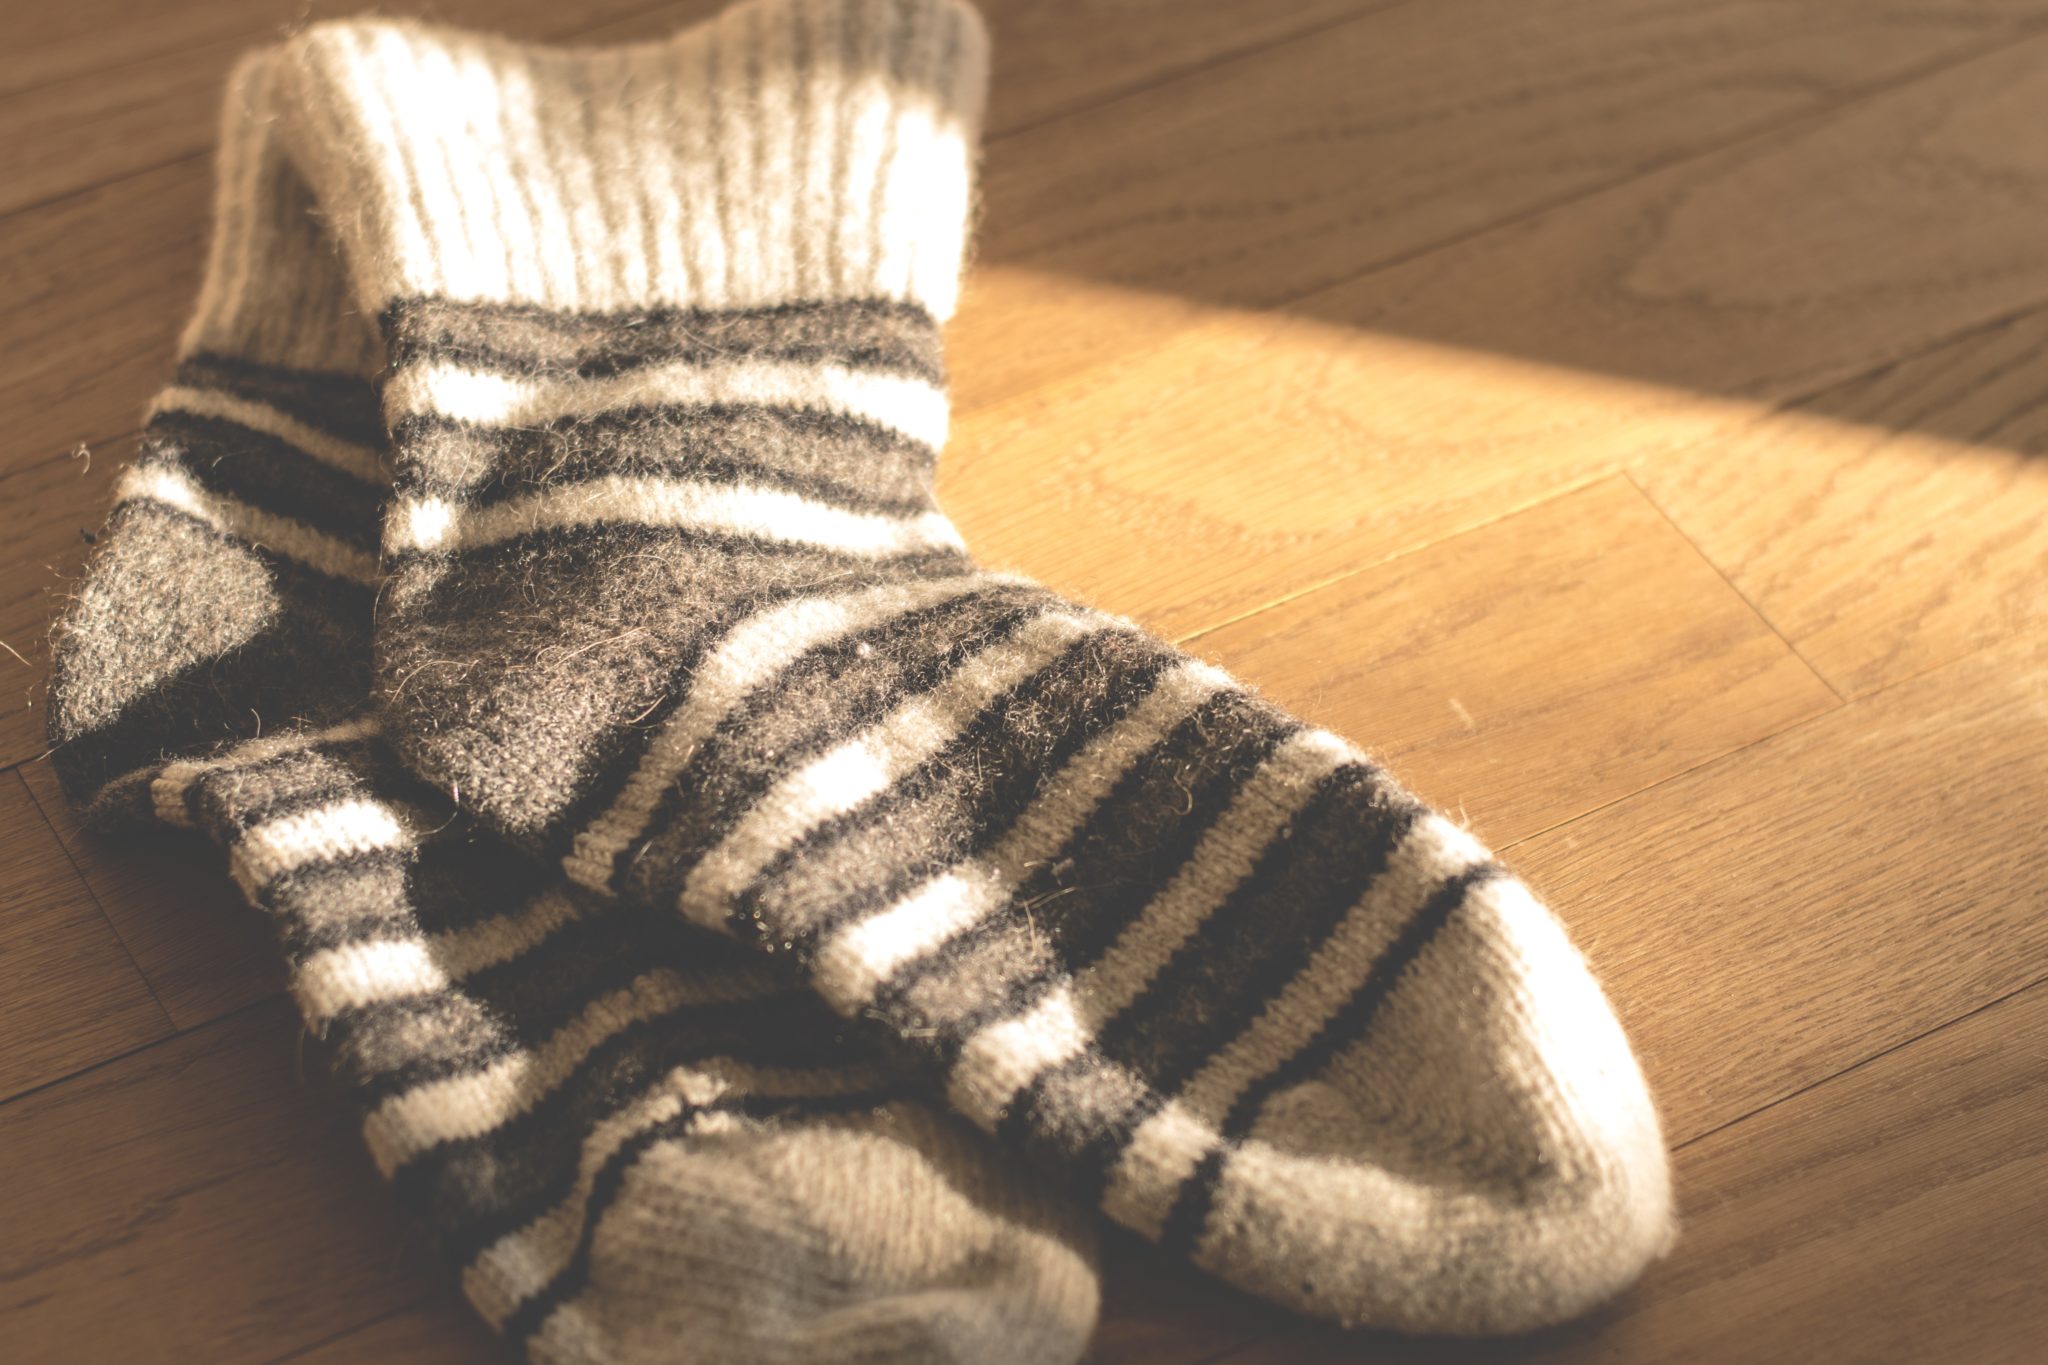 Home organizing best practice: pick up your socks